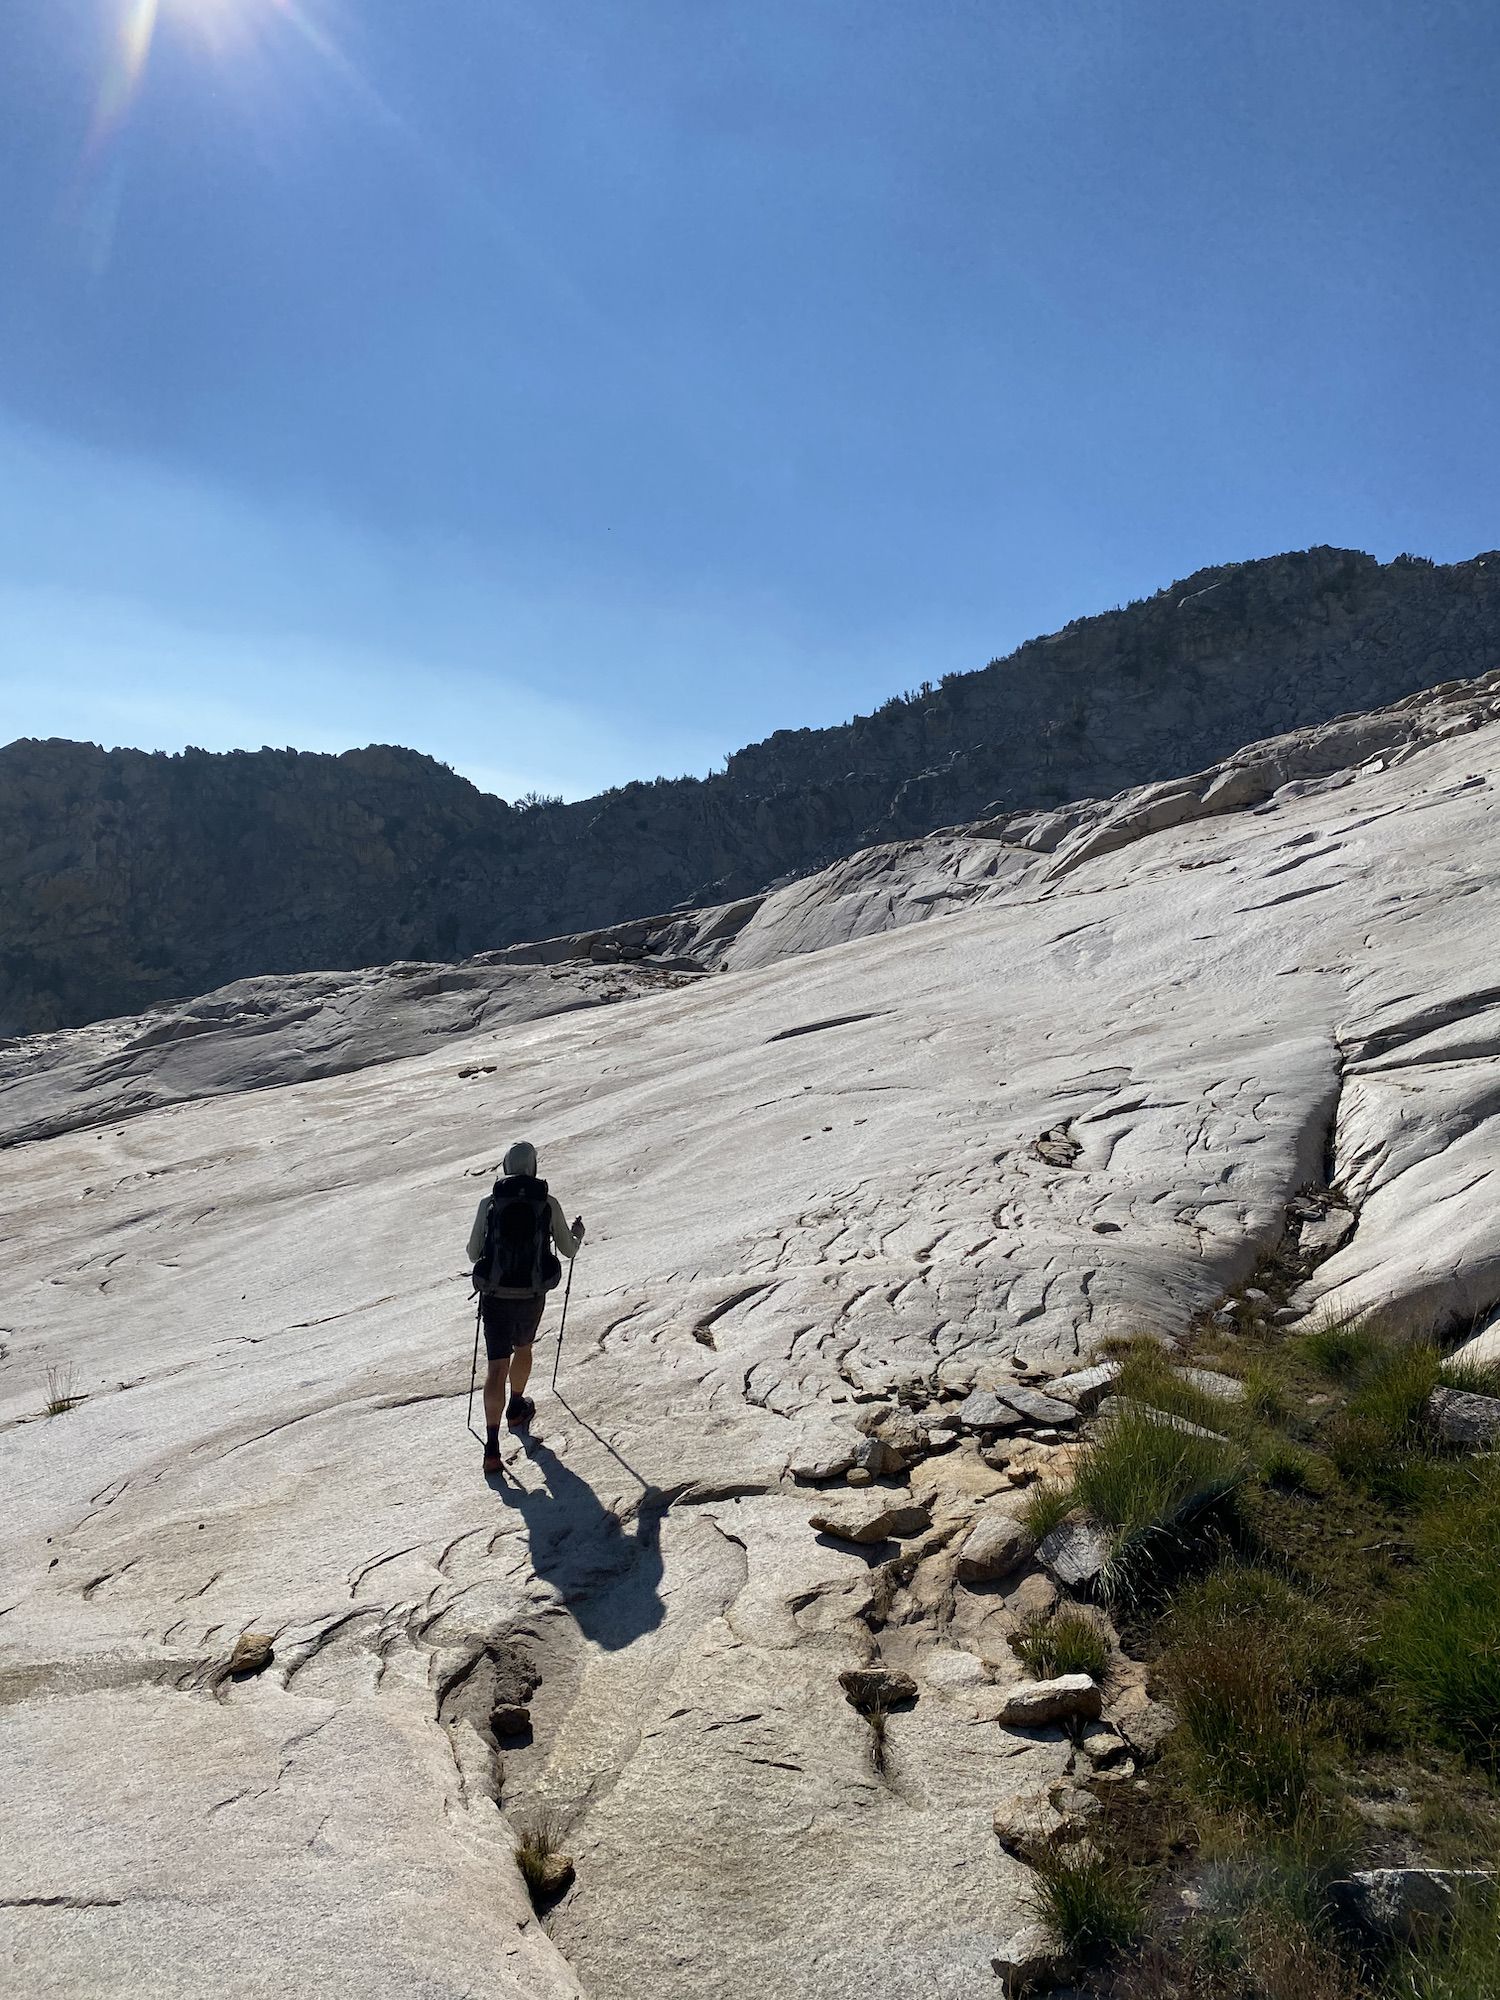 A backpacker walking on smooth granite.